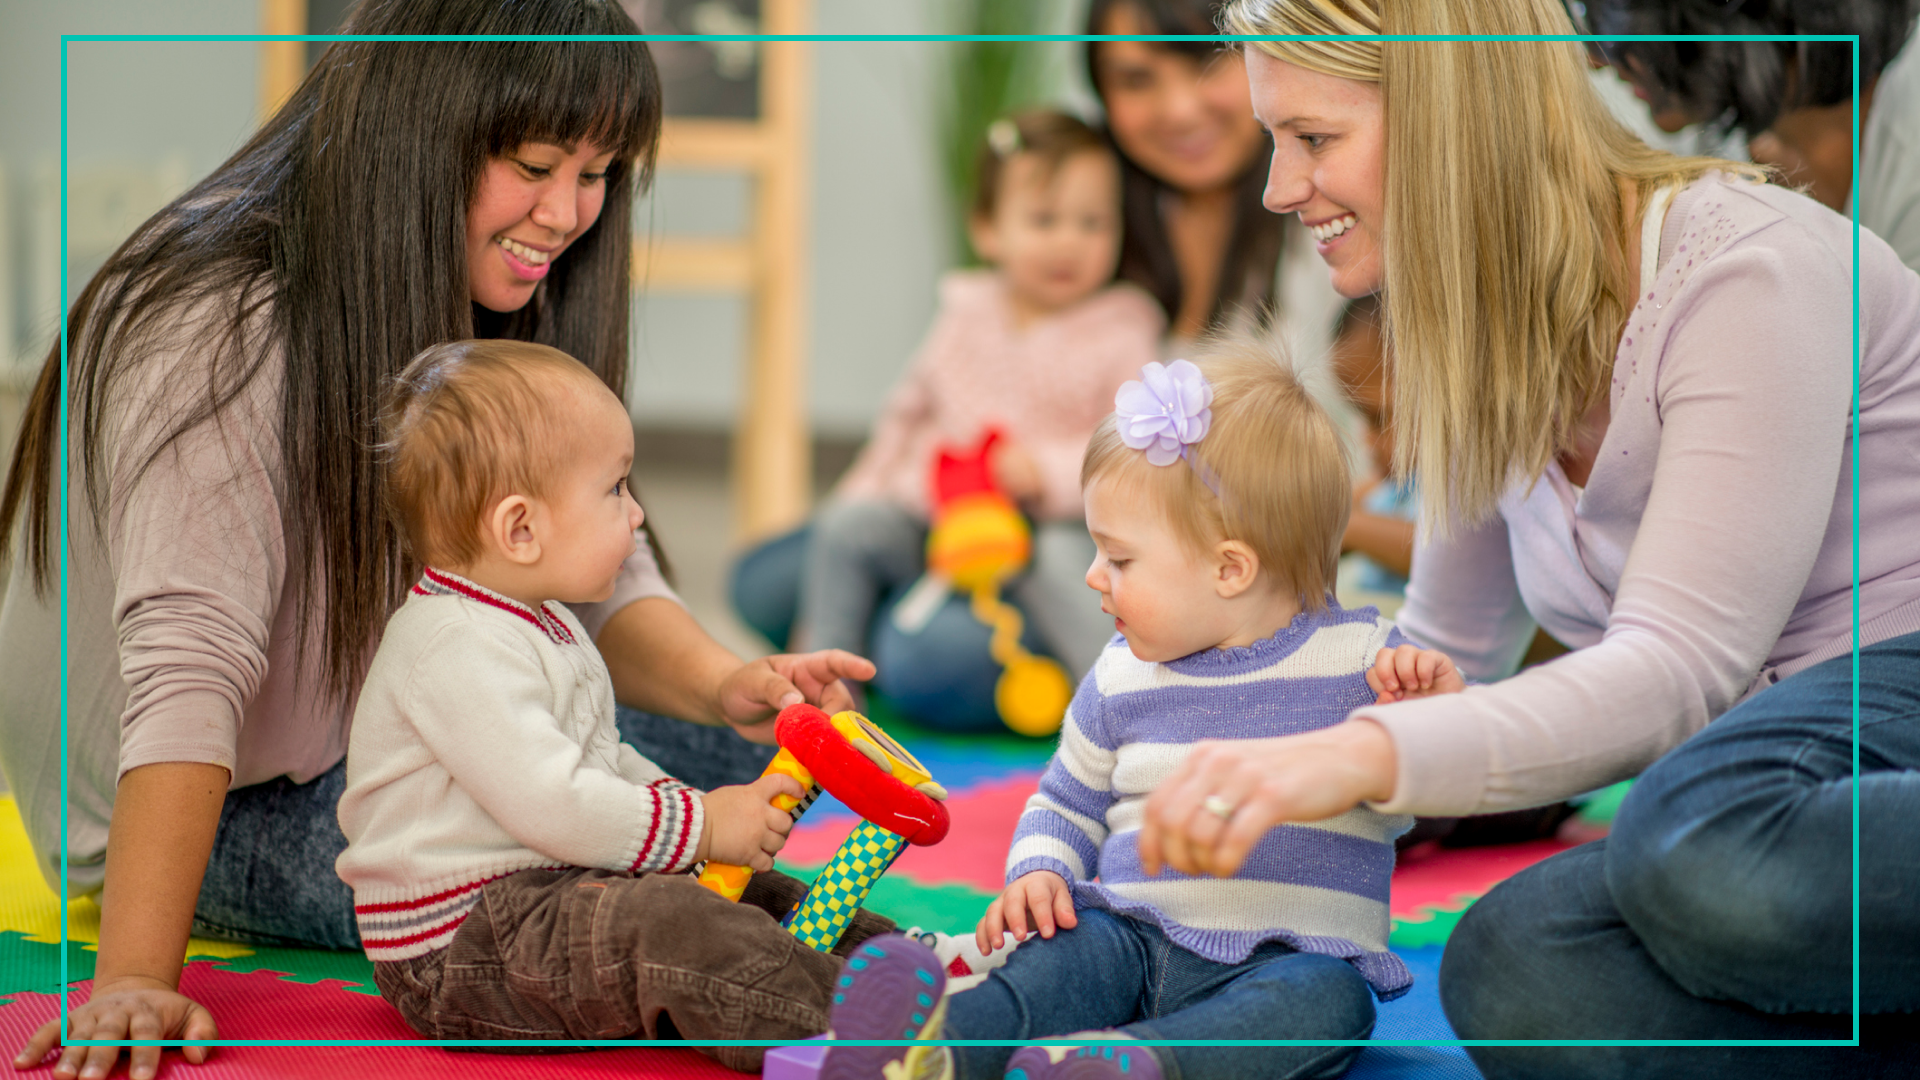 Socialization helps babies develop language, cognitive, and physical skills. Here’s when babies should start interacting with others and how parents can help.